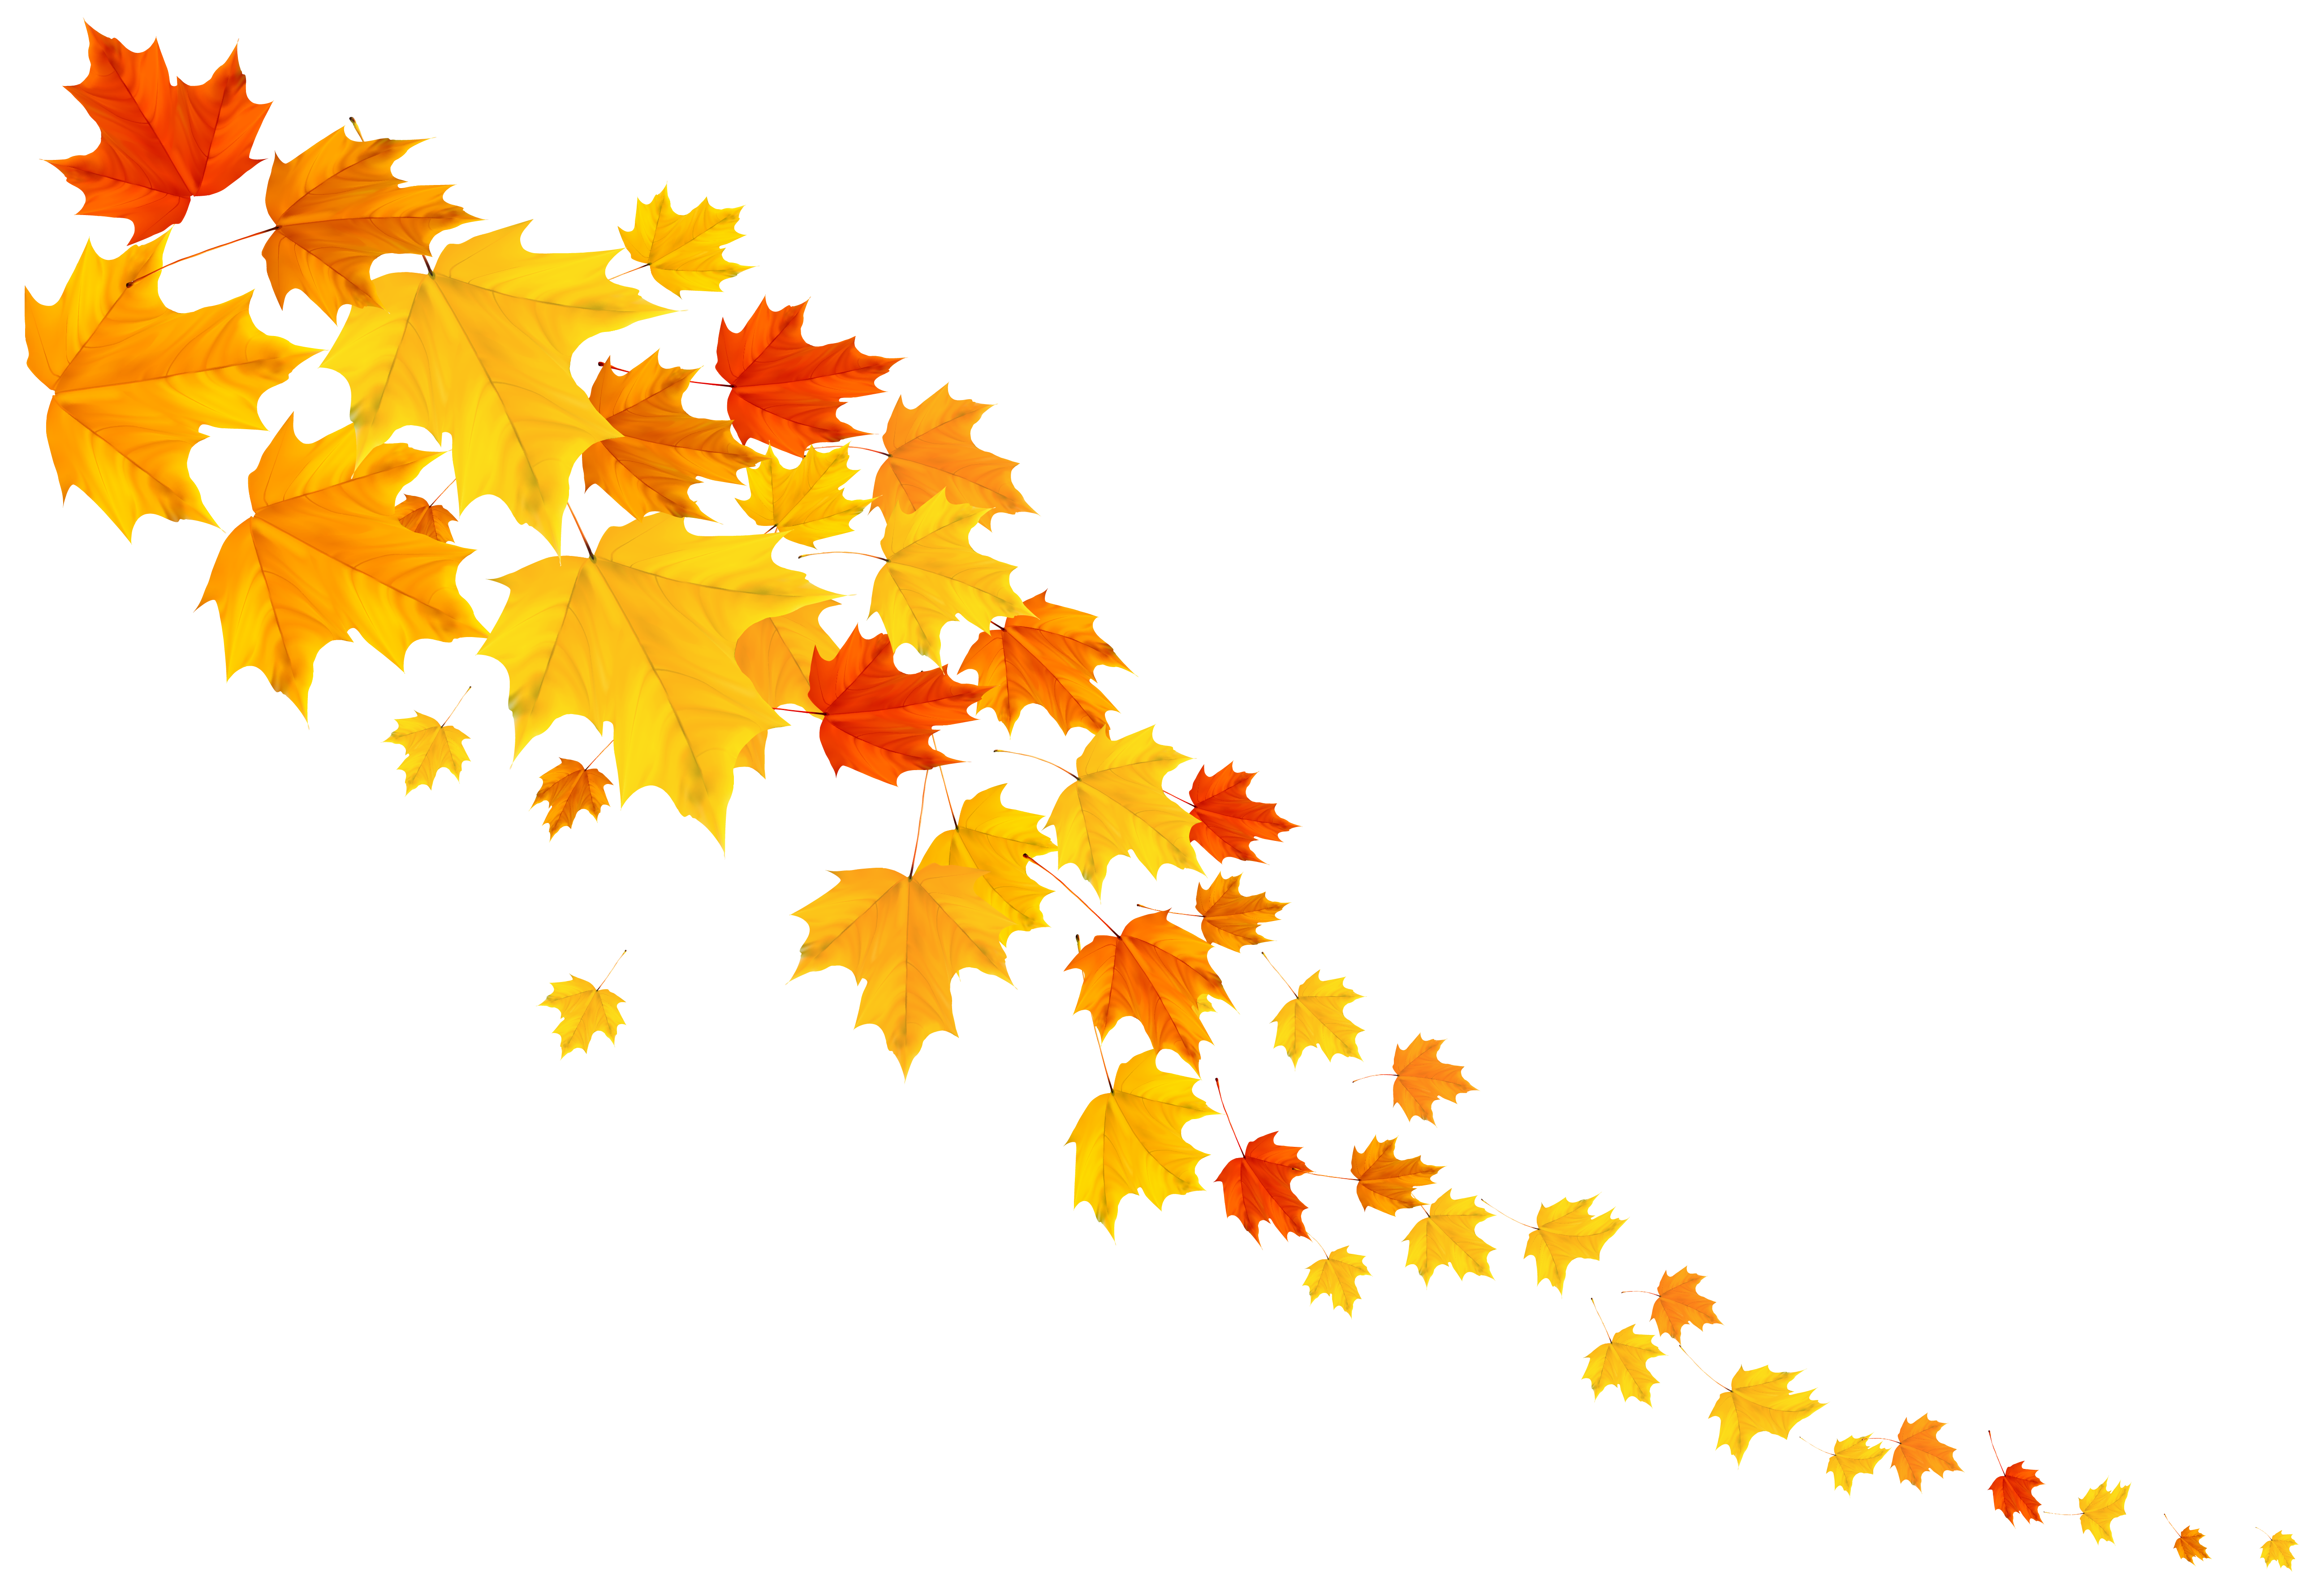 Decorative clipart autumn. Leafs png image gallery